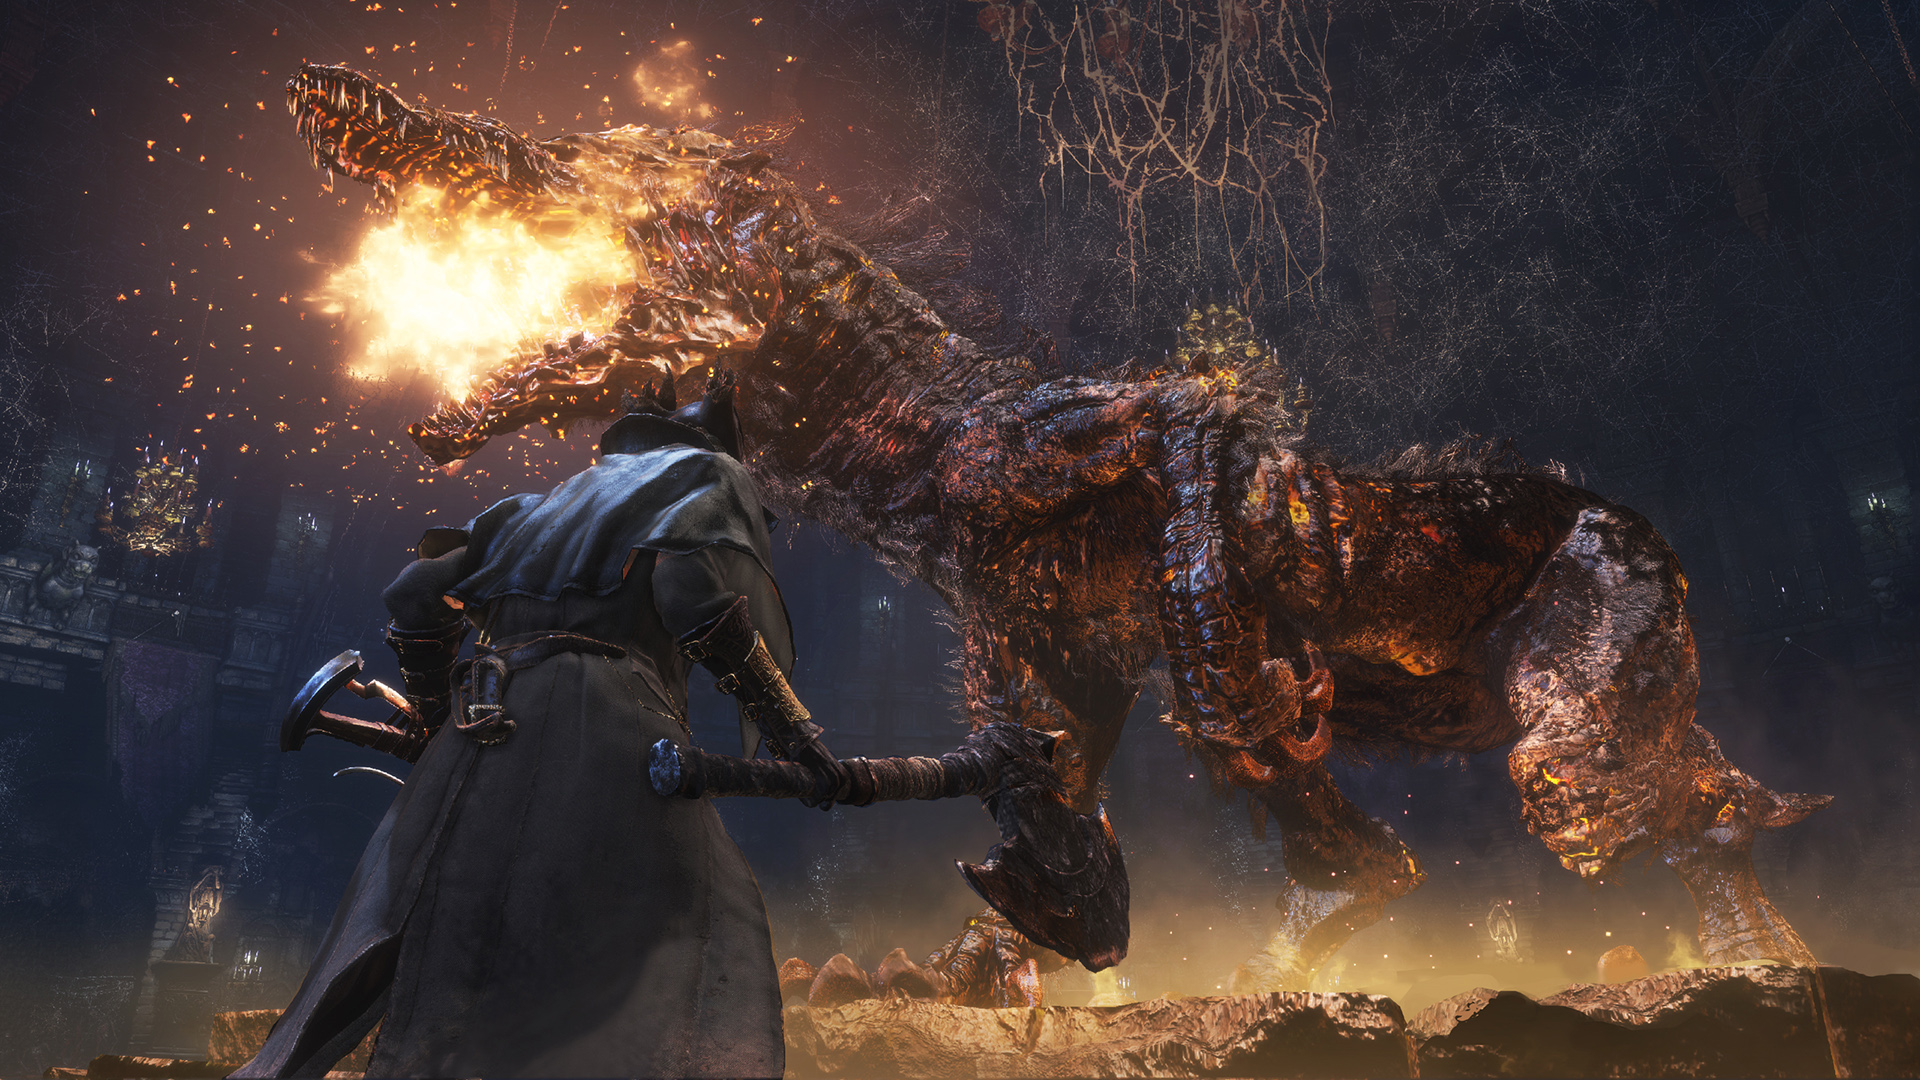 Bloodborne - Game Details And Playtime Revealed - New Screenshots